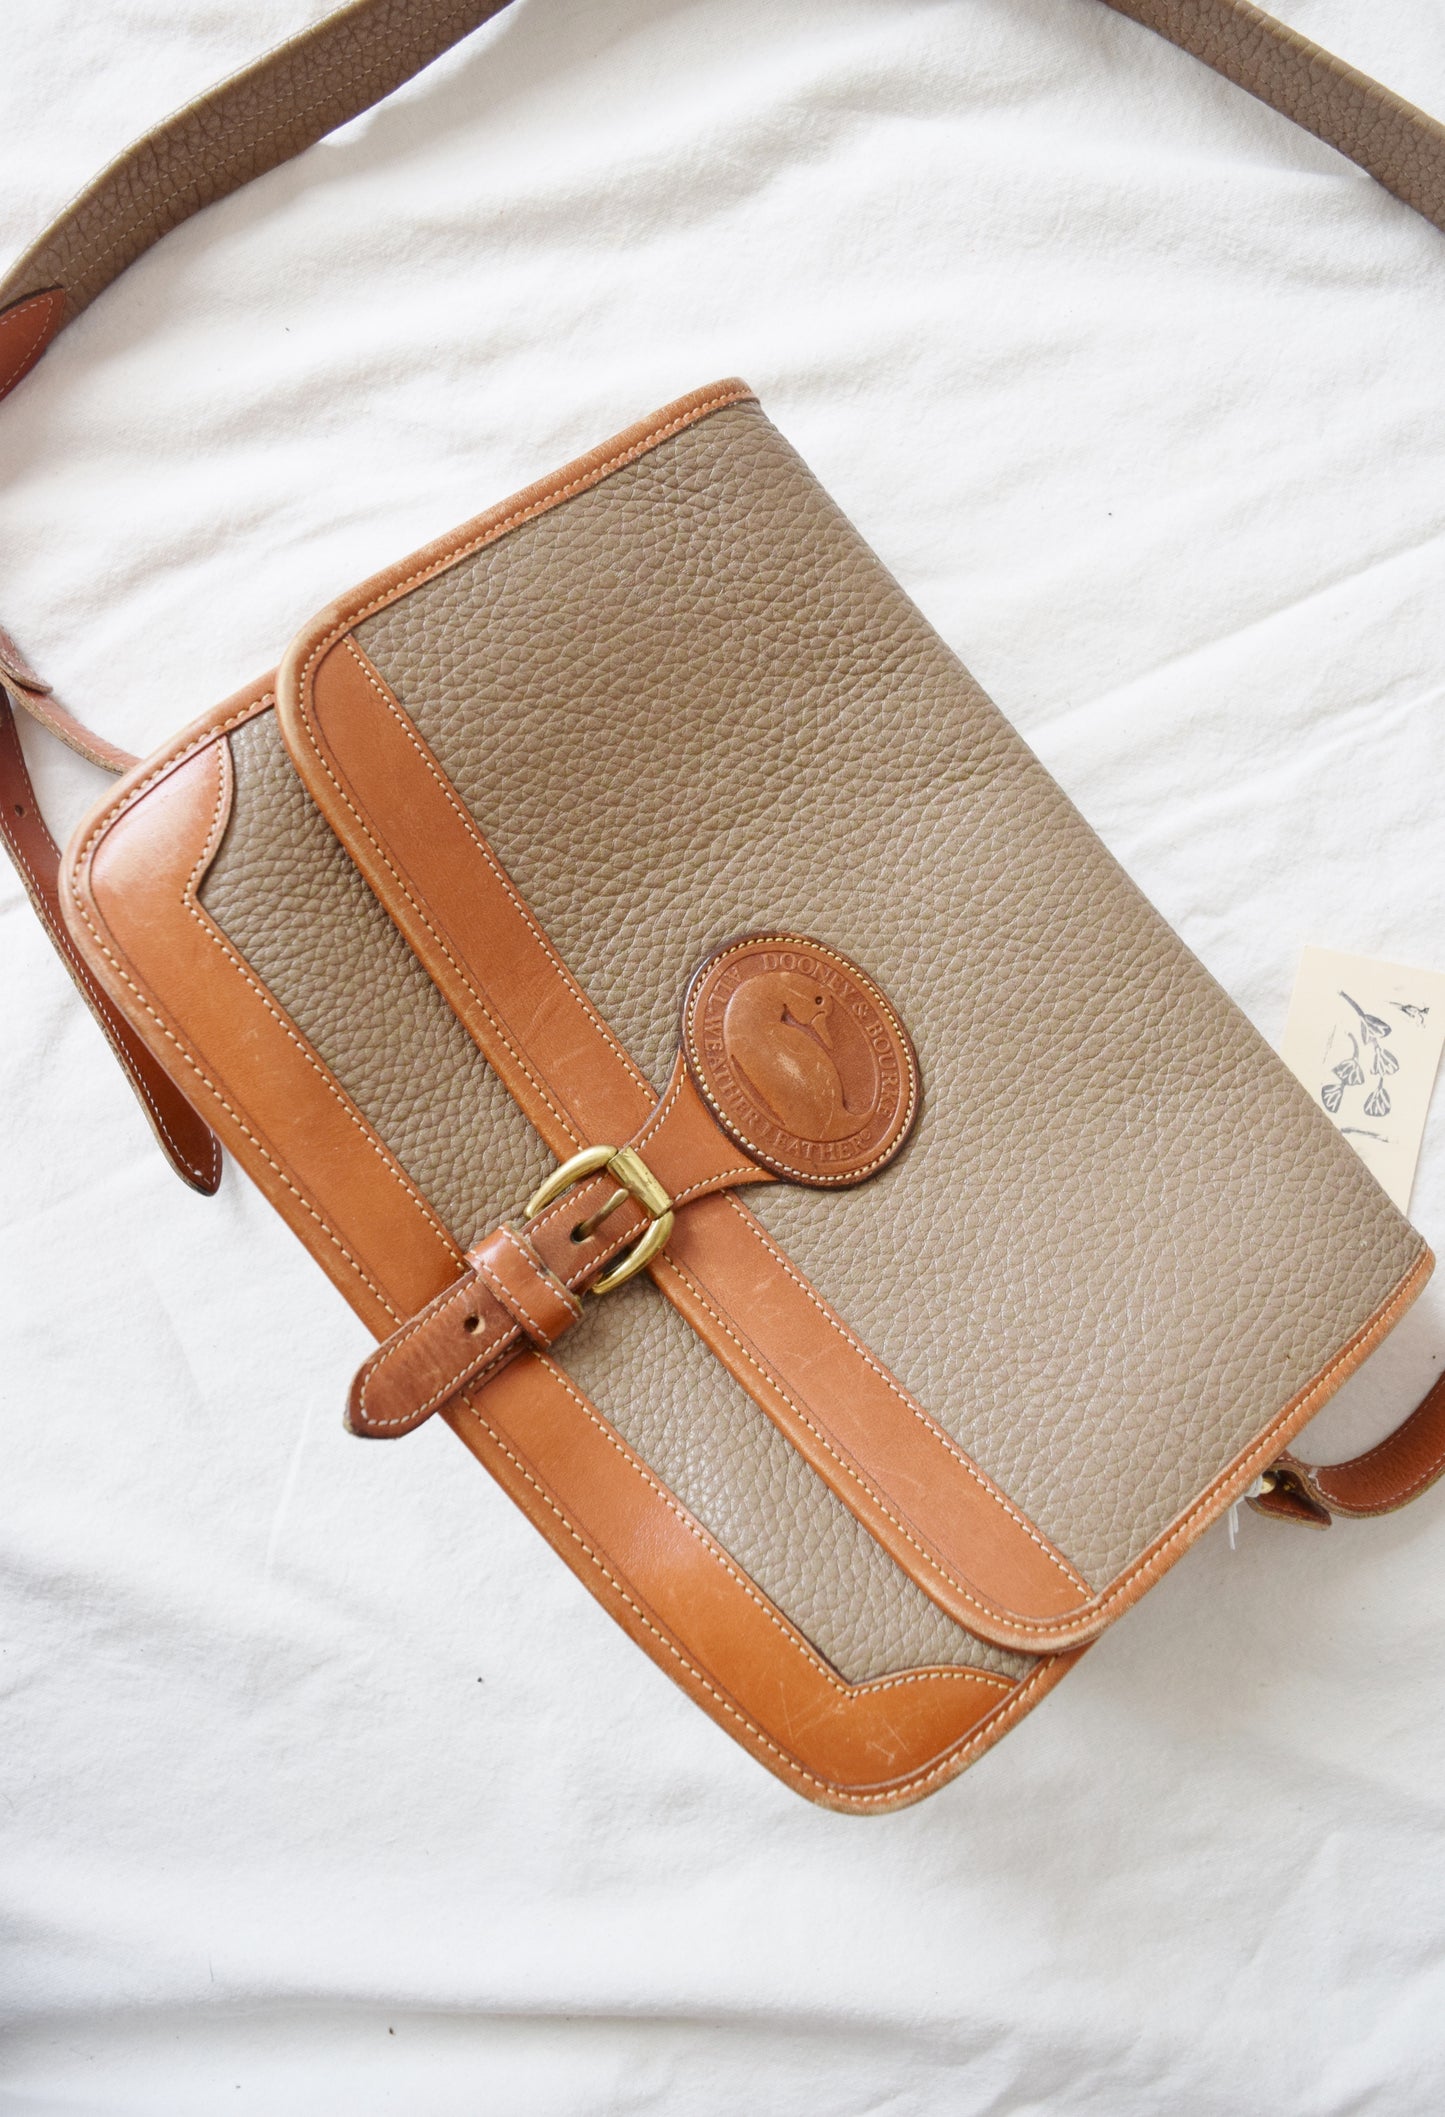 Vintage Dooney & Bourke All Weather Leather Crossbody Bag / Purse in Putty and British Tan